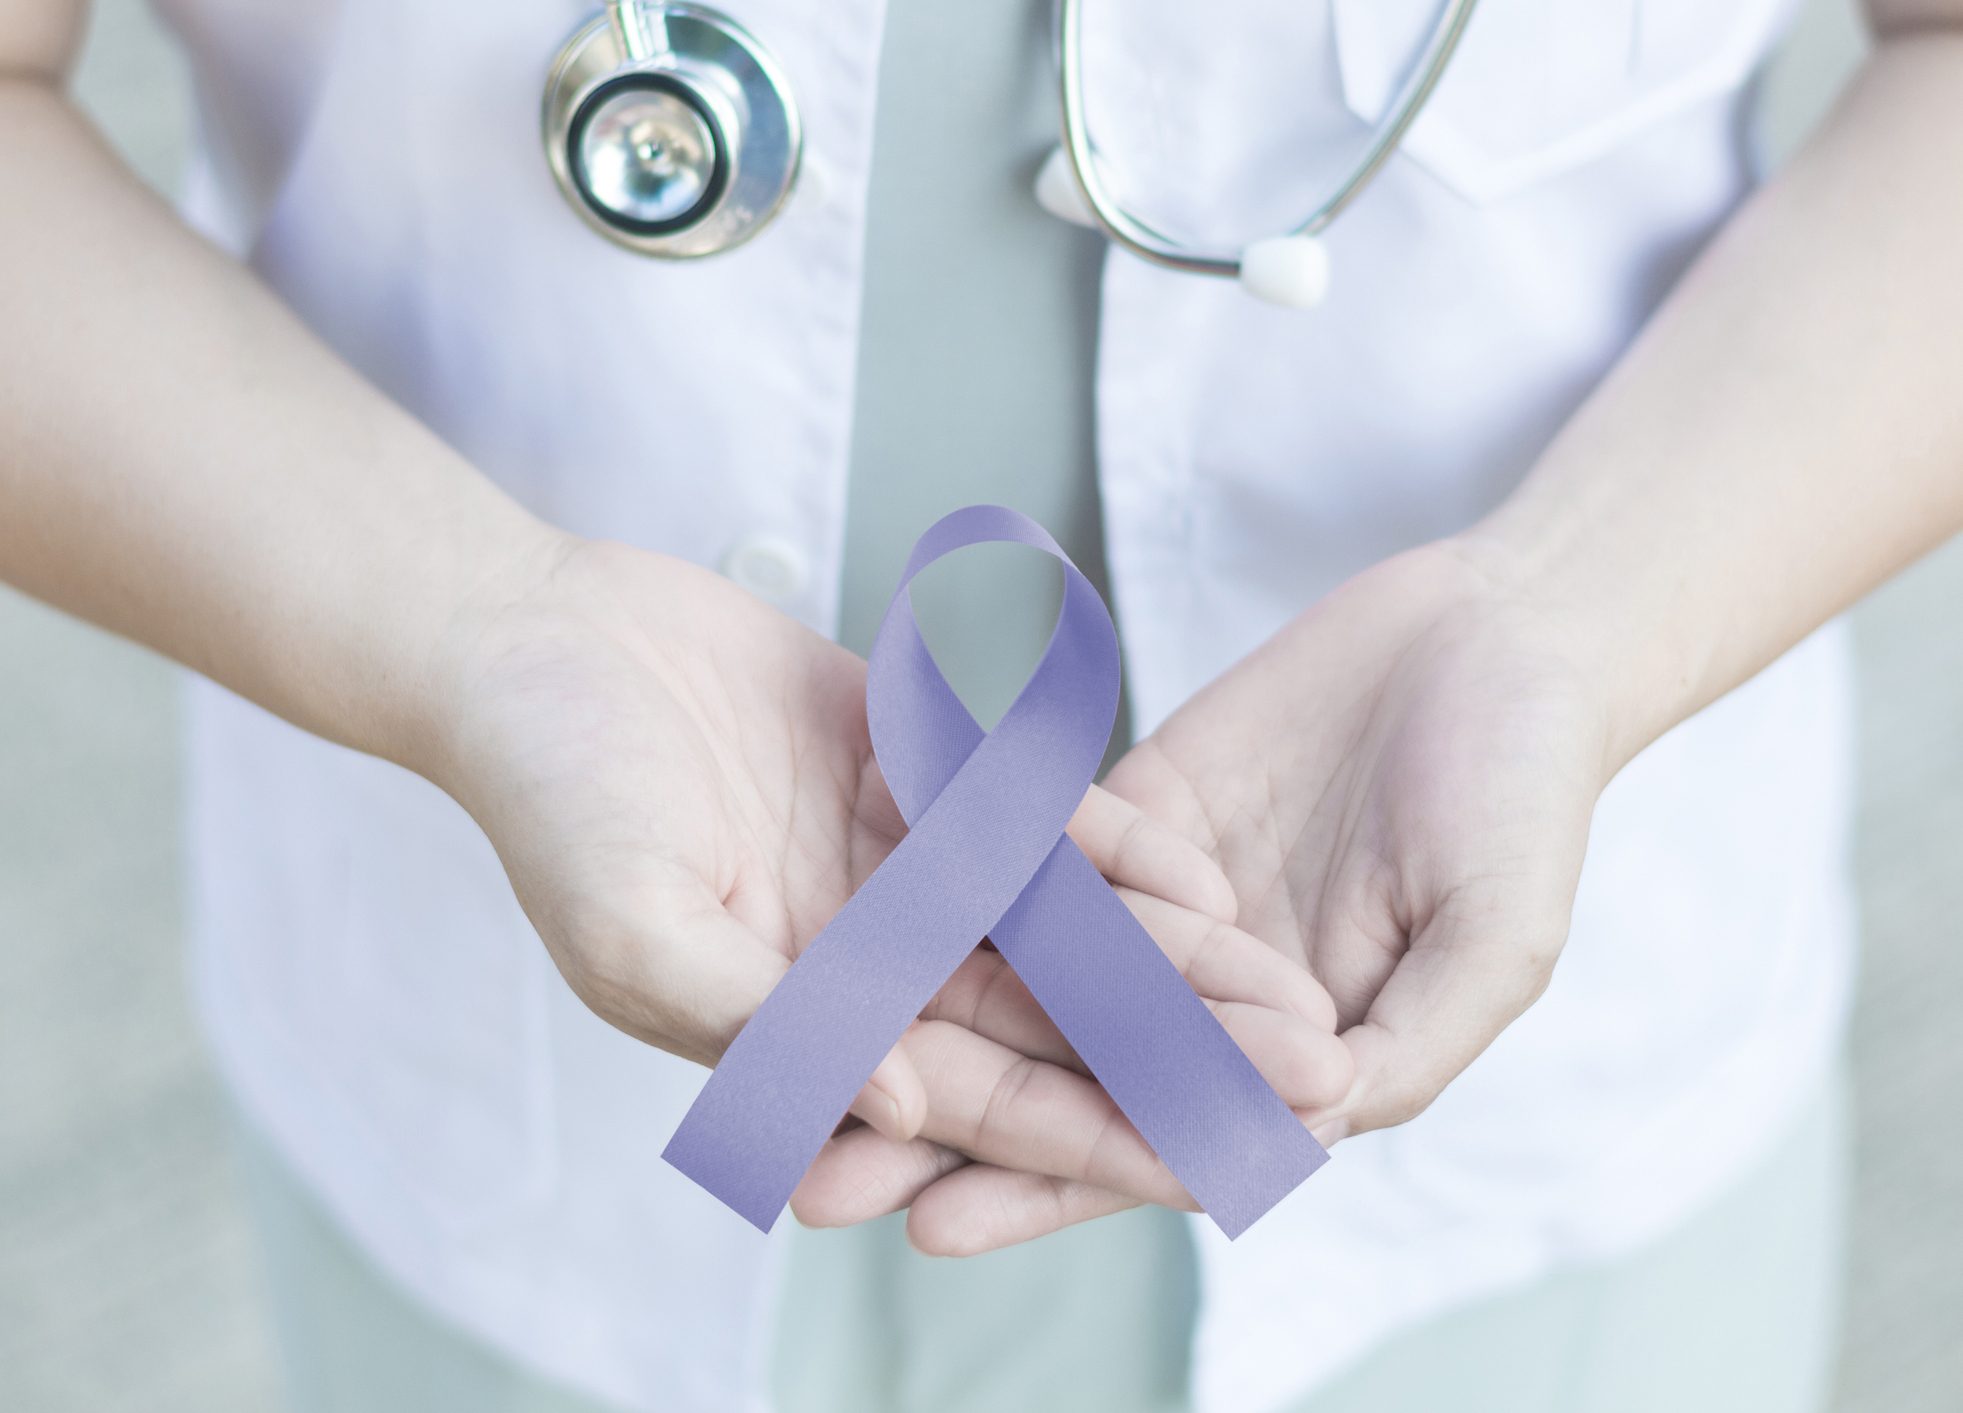 FUNIBER-periwinkle-blue-ribbon-awareness-in-doctor-hand-for-acid-reflux-gerd-eating-disorders-anorexia-bulimia-esophageal-gastric-pulmonary-hypertension-stomach-cancer